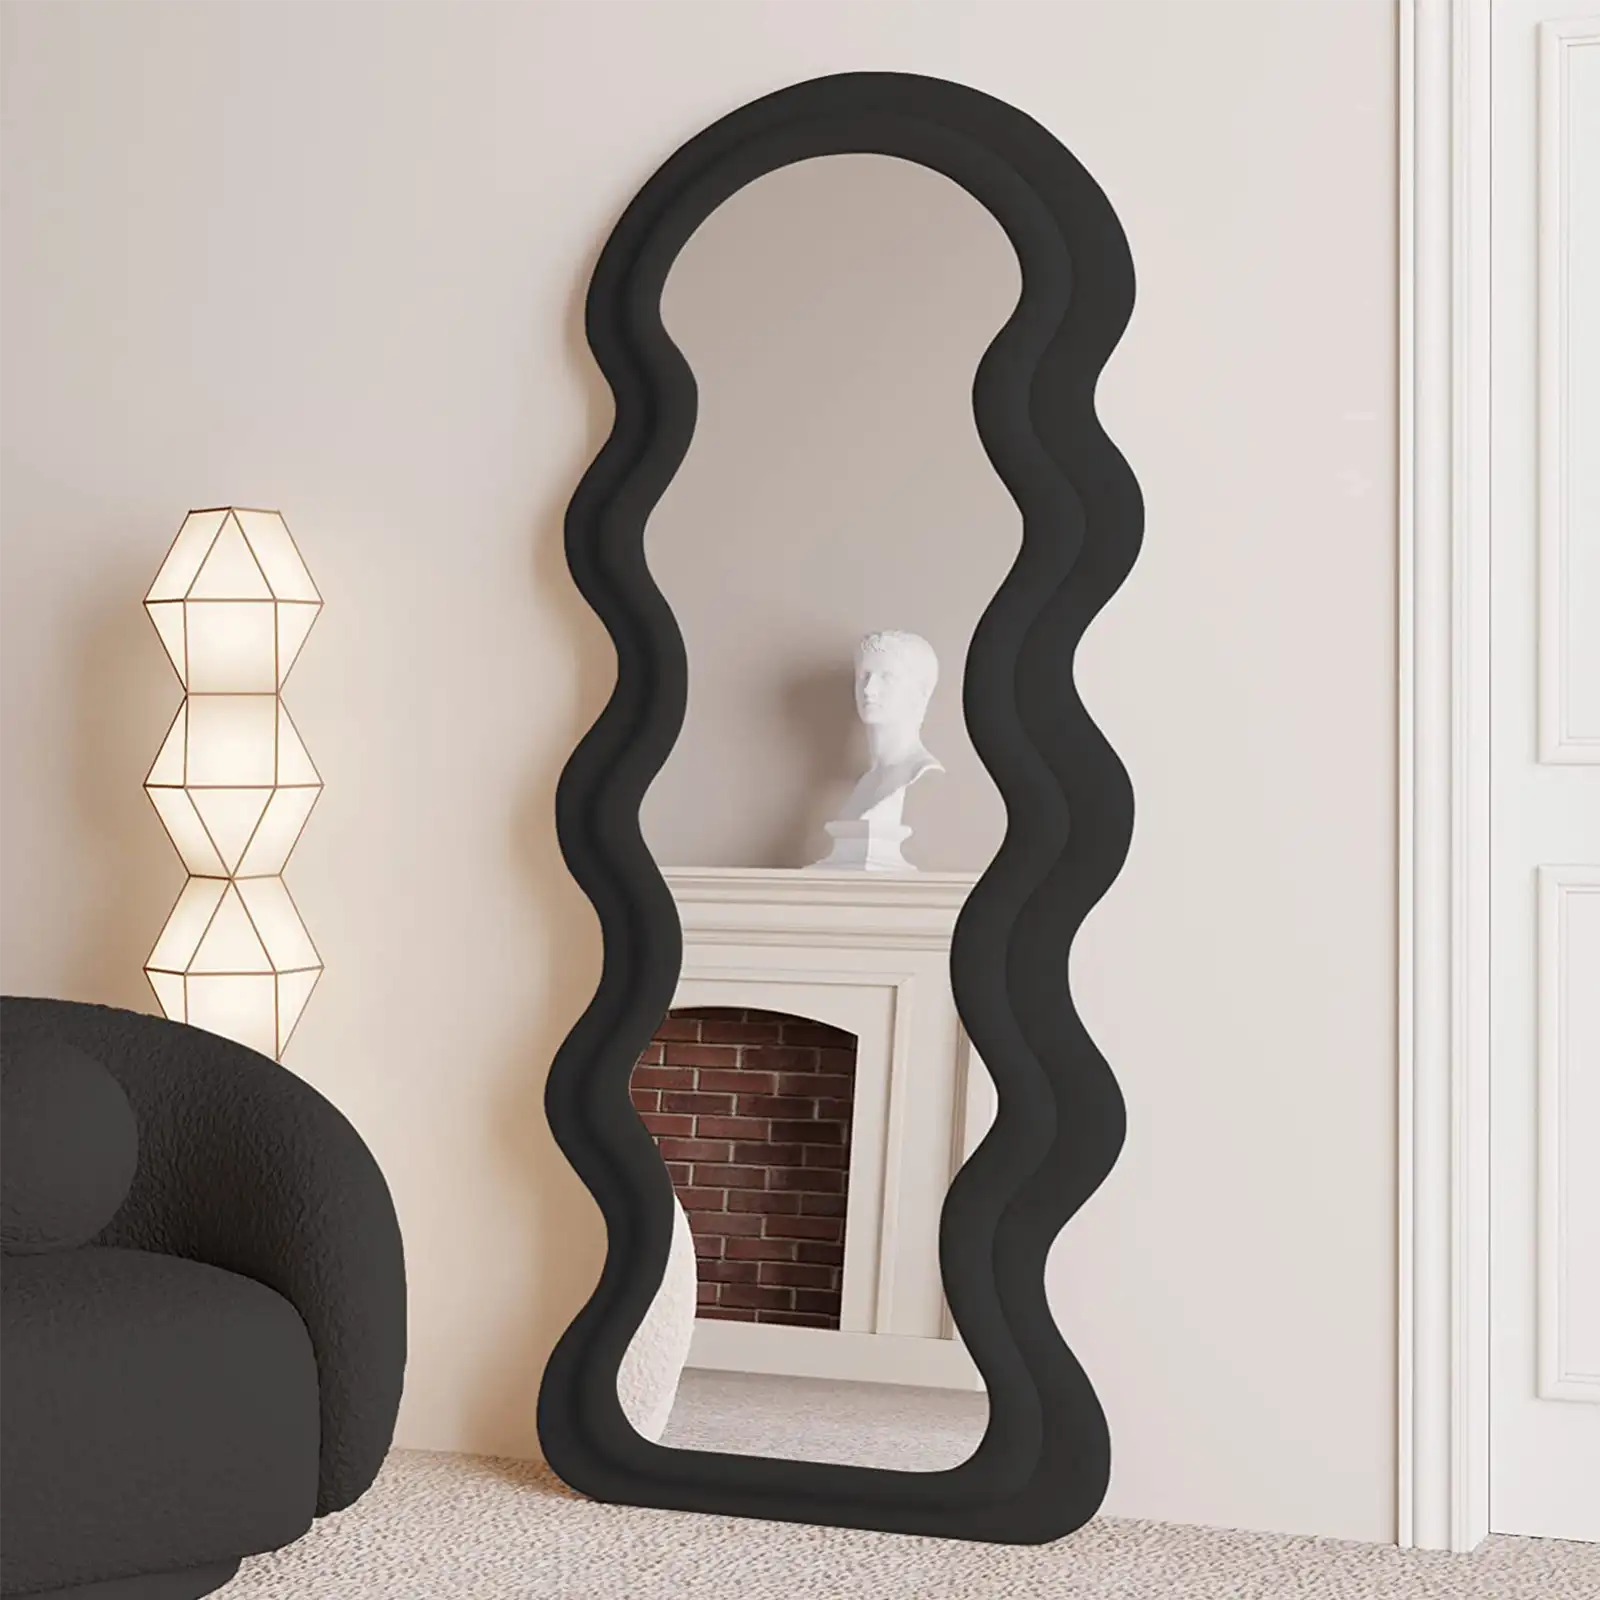 Irregular Wavy Mirror Full Length Mirror,Wave Floor Mirror, Wall Mirror  Standing Hanging or Leaning Against Wall for Bedroom, Flannel Wrapped  Wooden